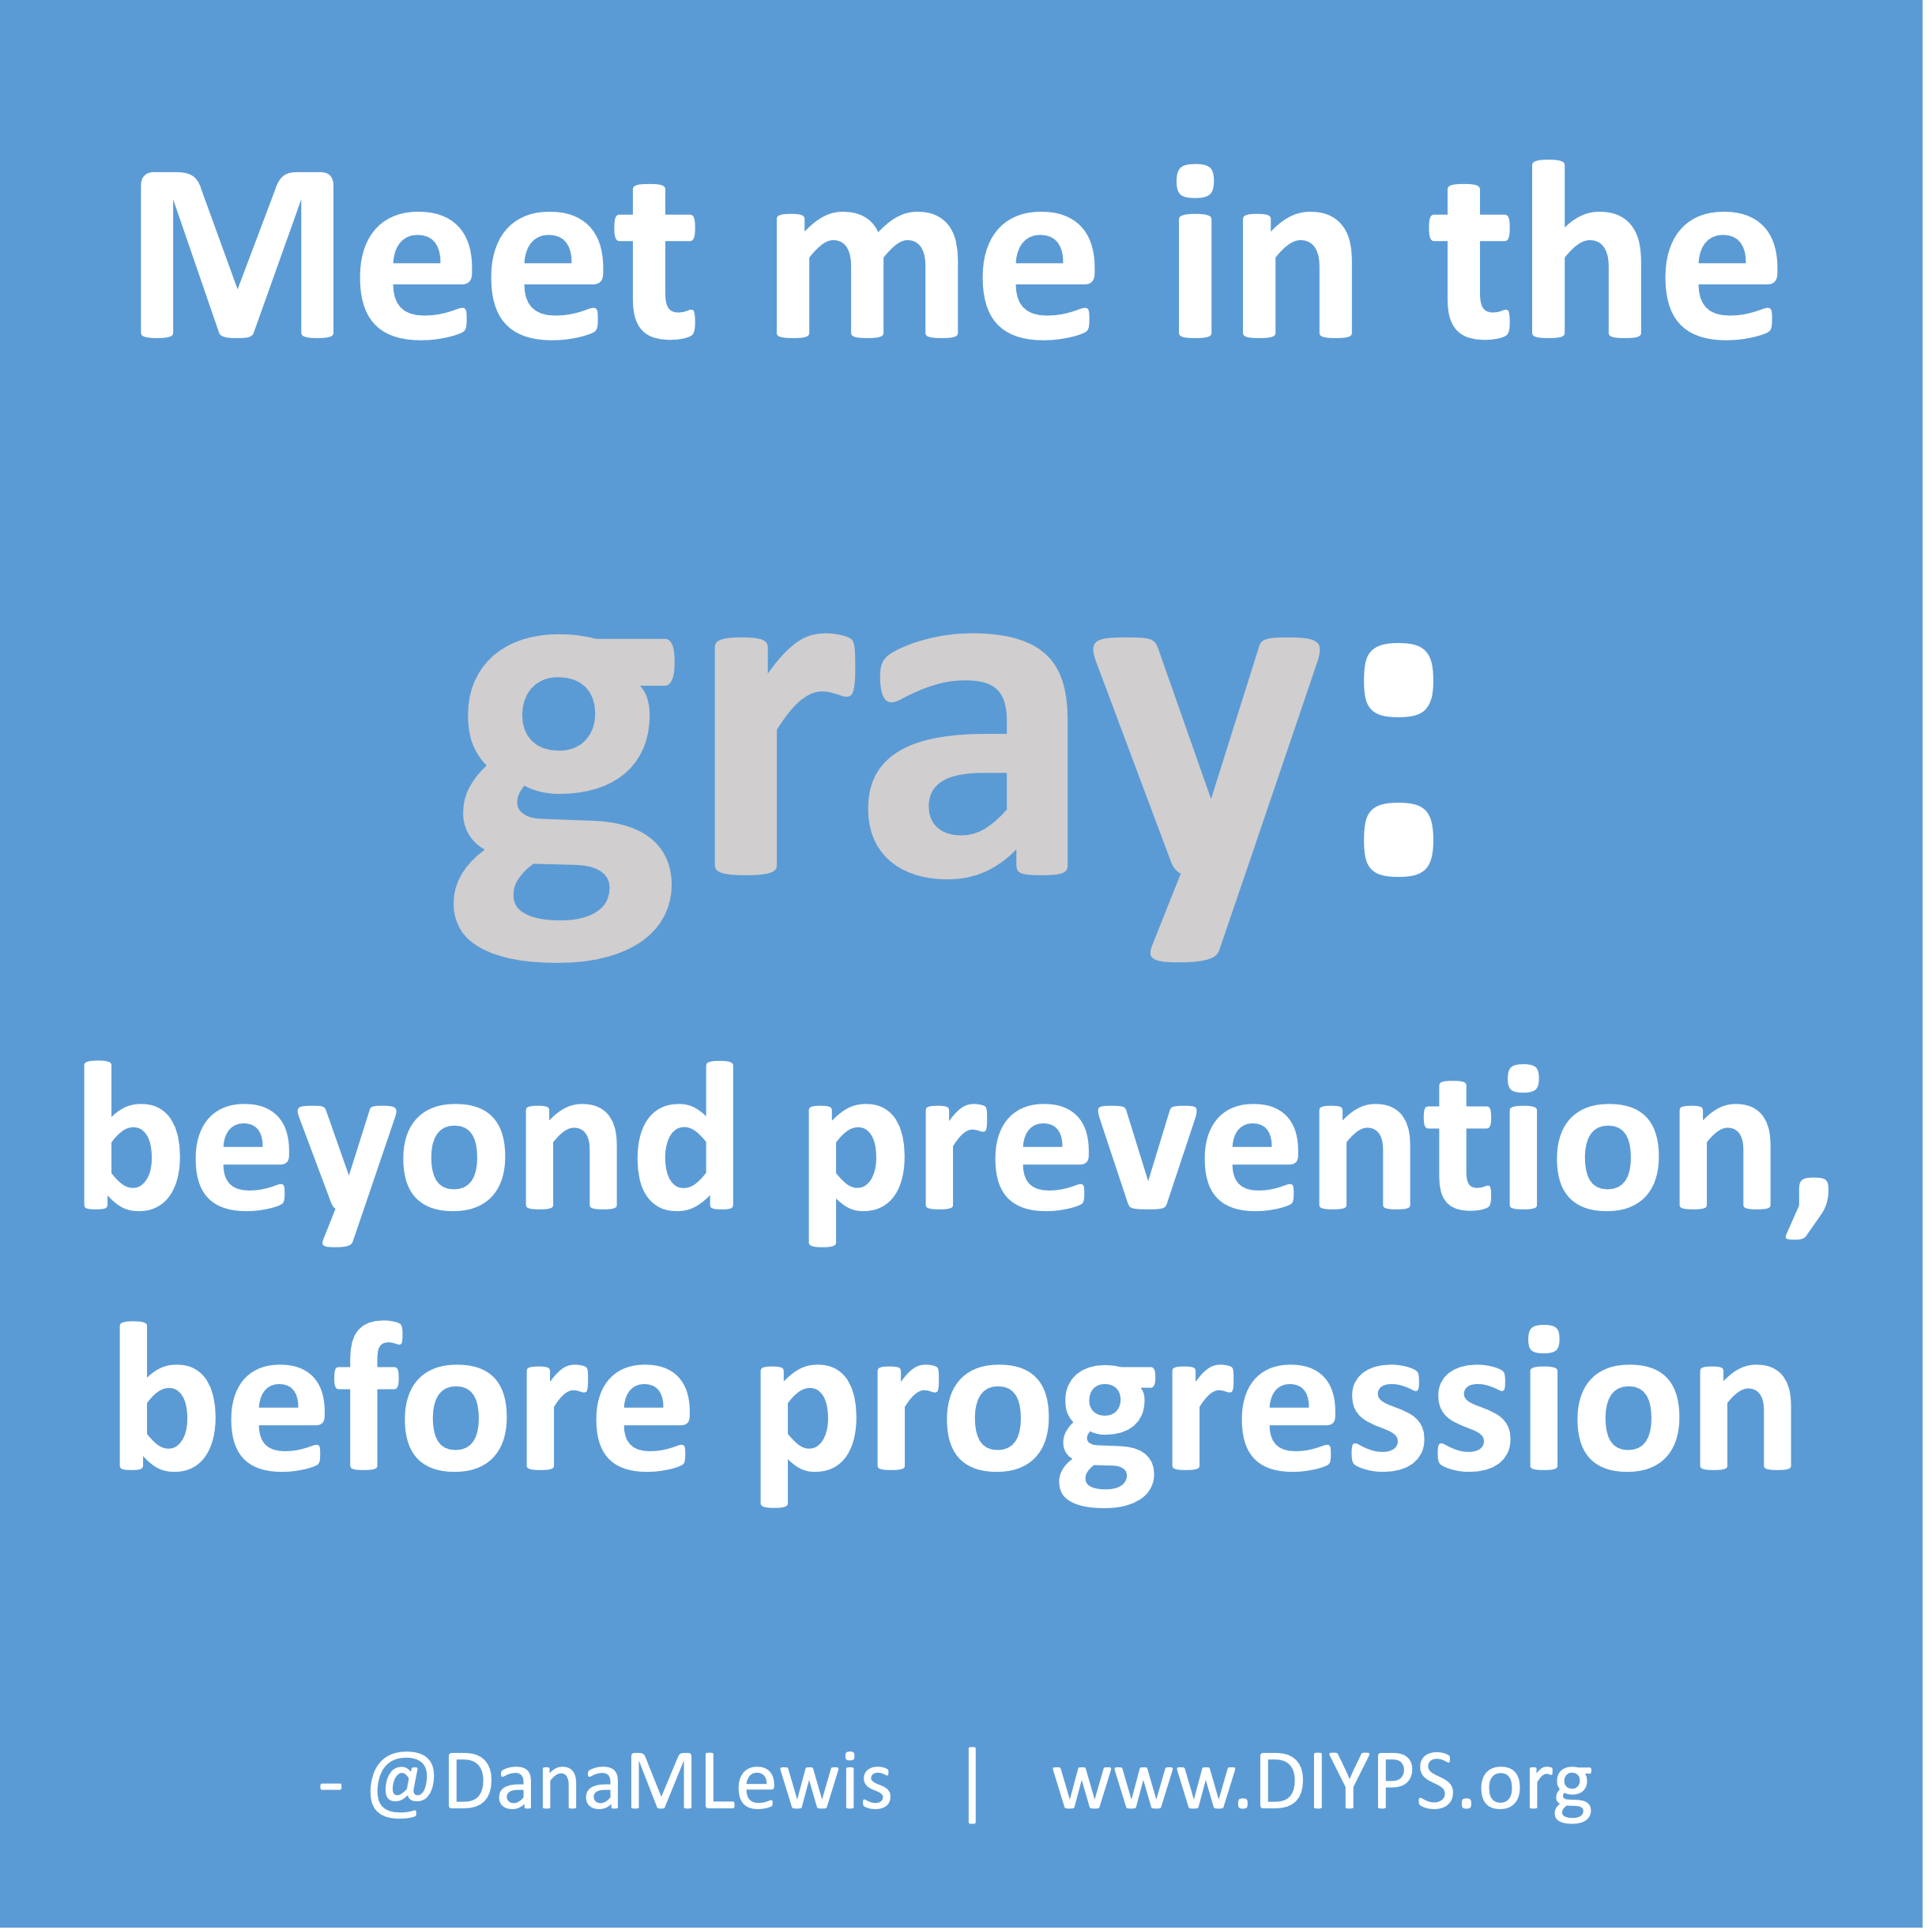 Meet me in the gray: beyond prevention, before progression - a blog written by Dana M. Lewis on DIYPS.org